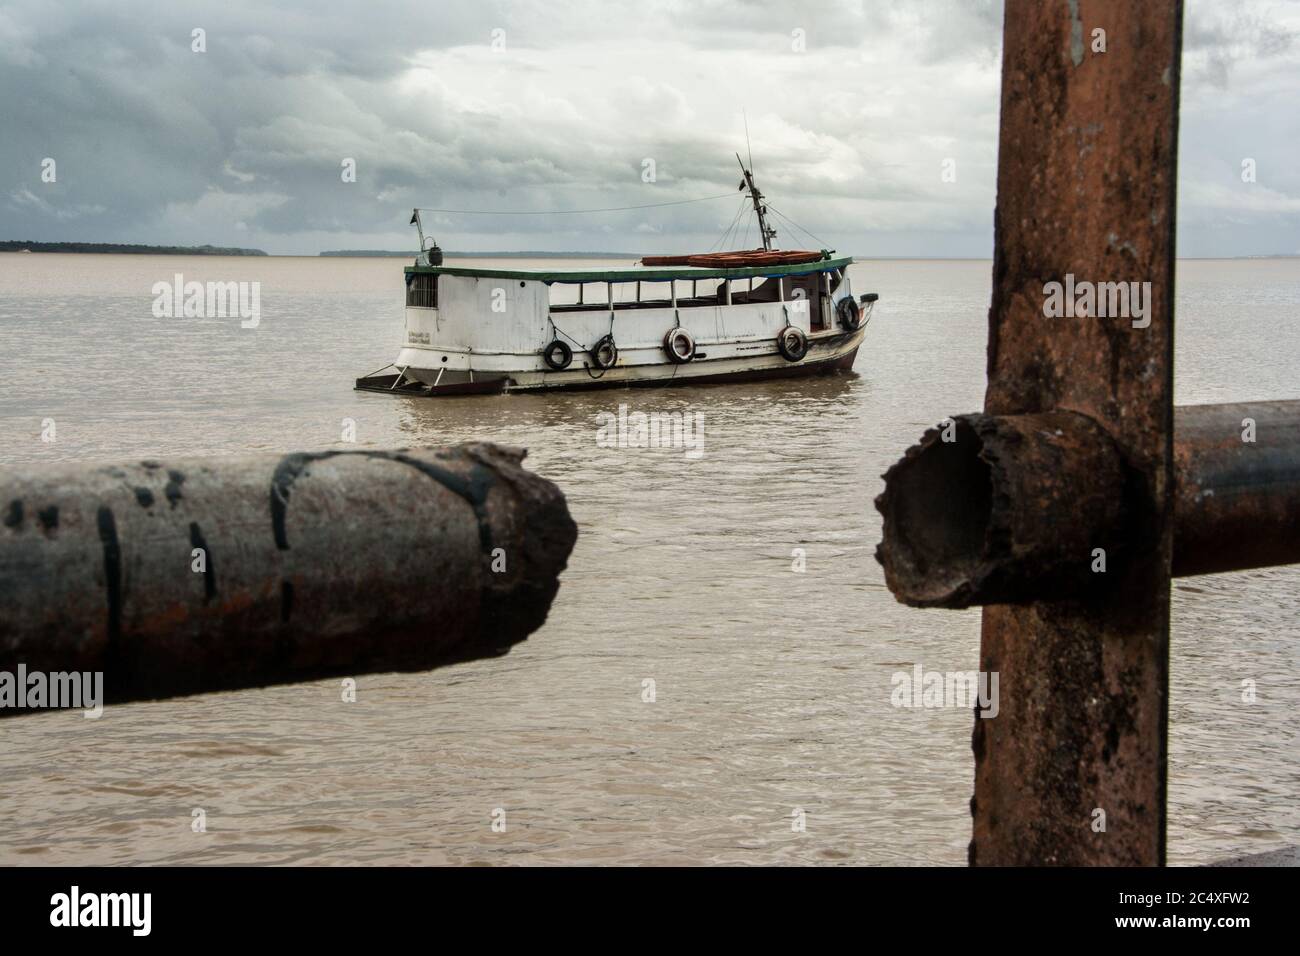 Boat at the background in the amazon river, State of Para, Brazil. Stock Photo